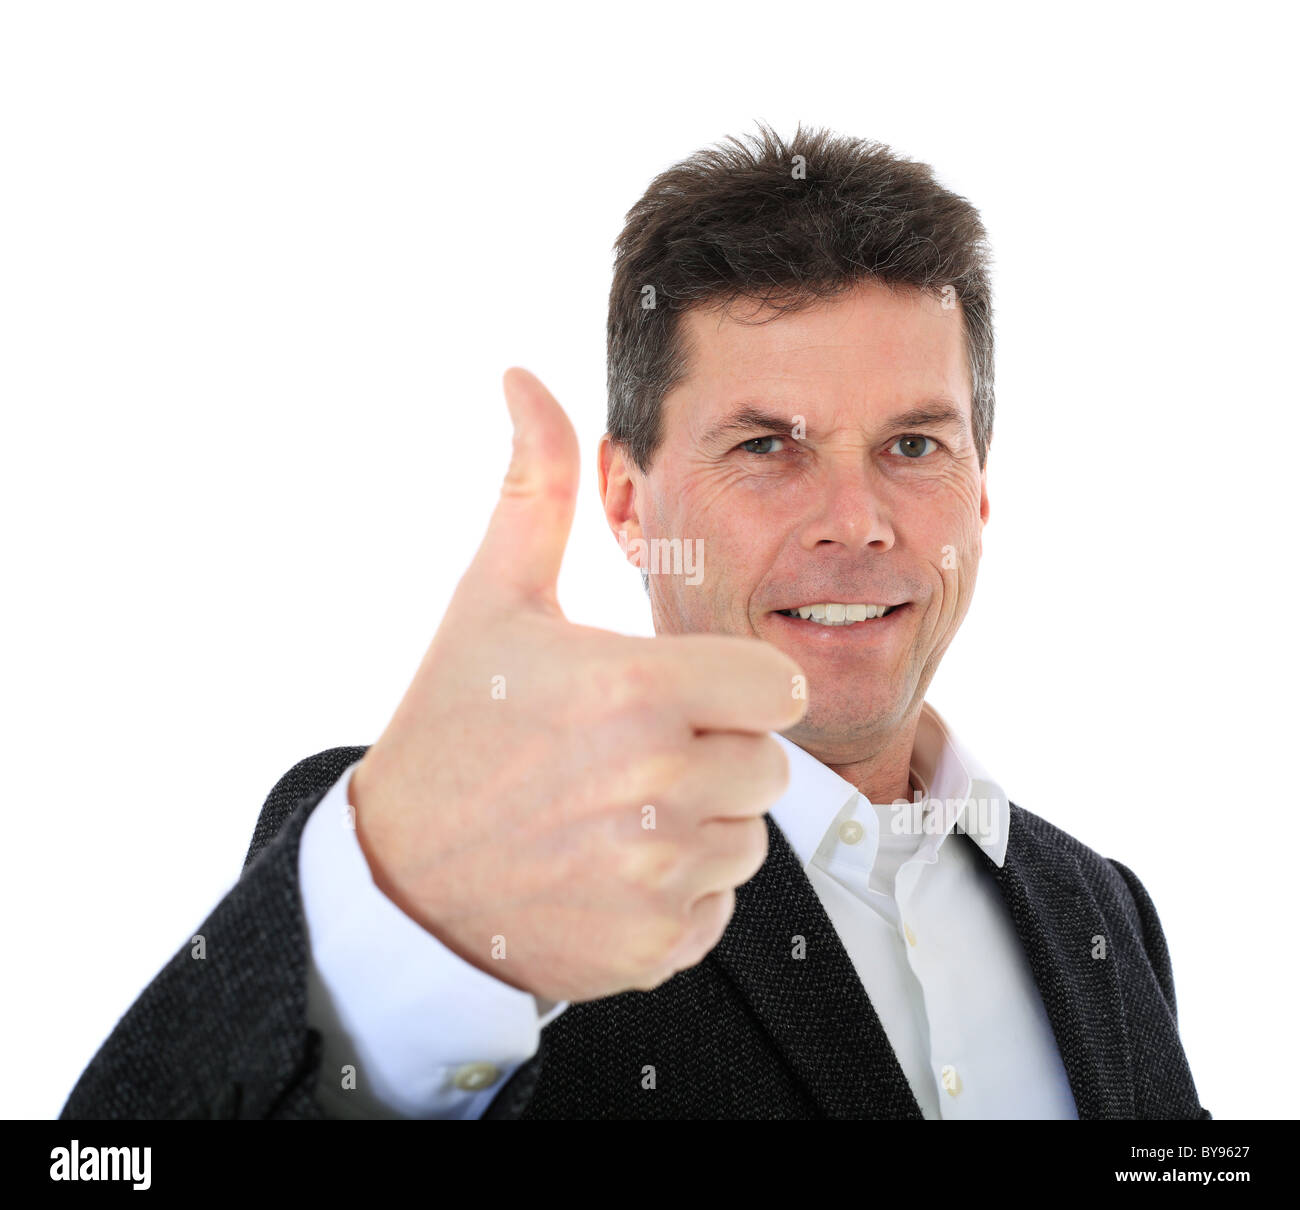 Attractive middle-aged man making thumbs up sign. All on white background. Stock Photo